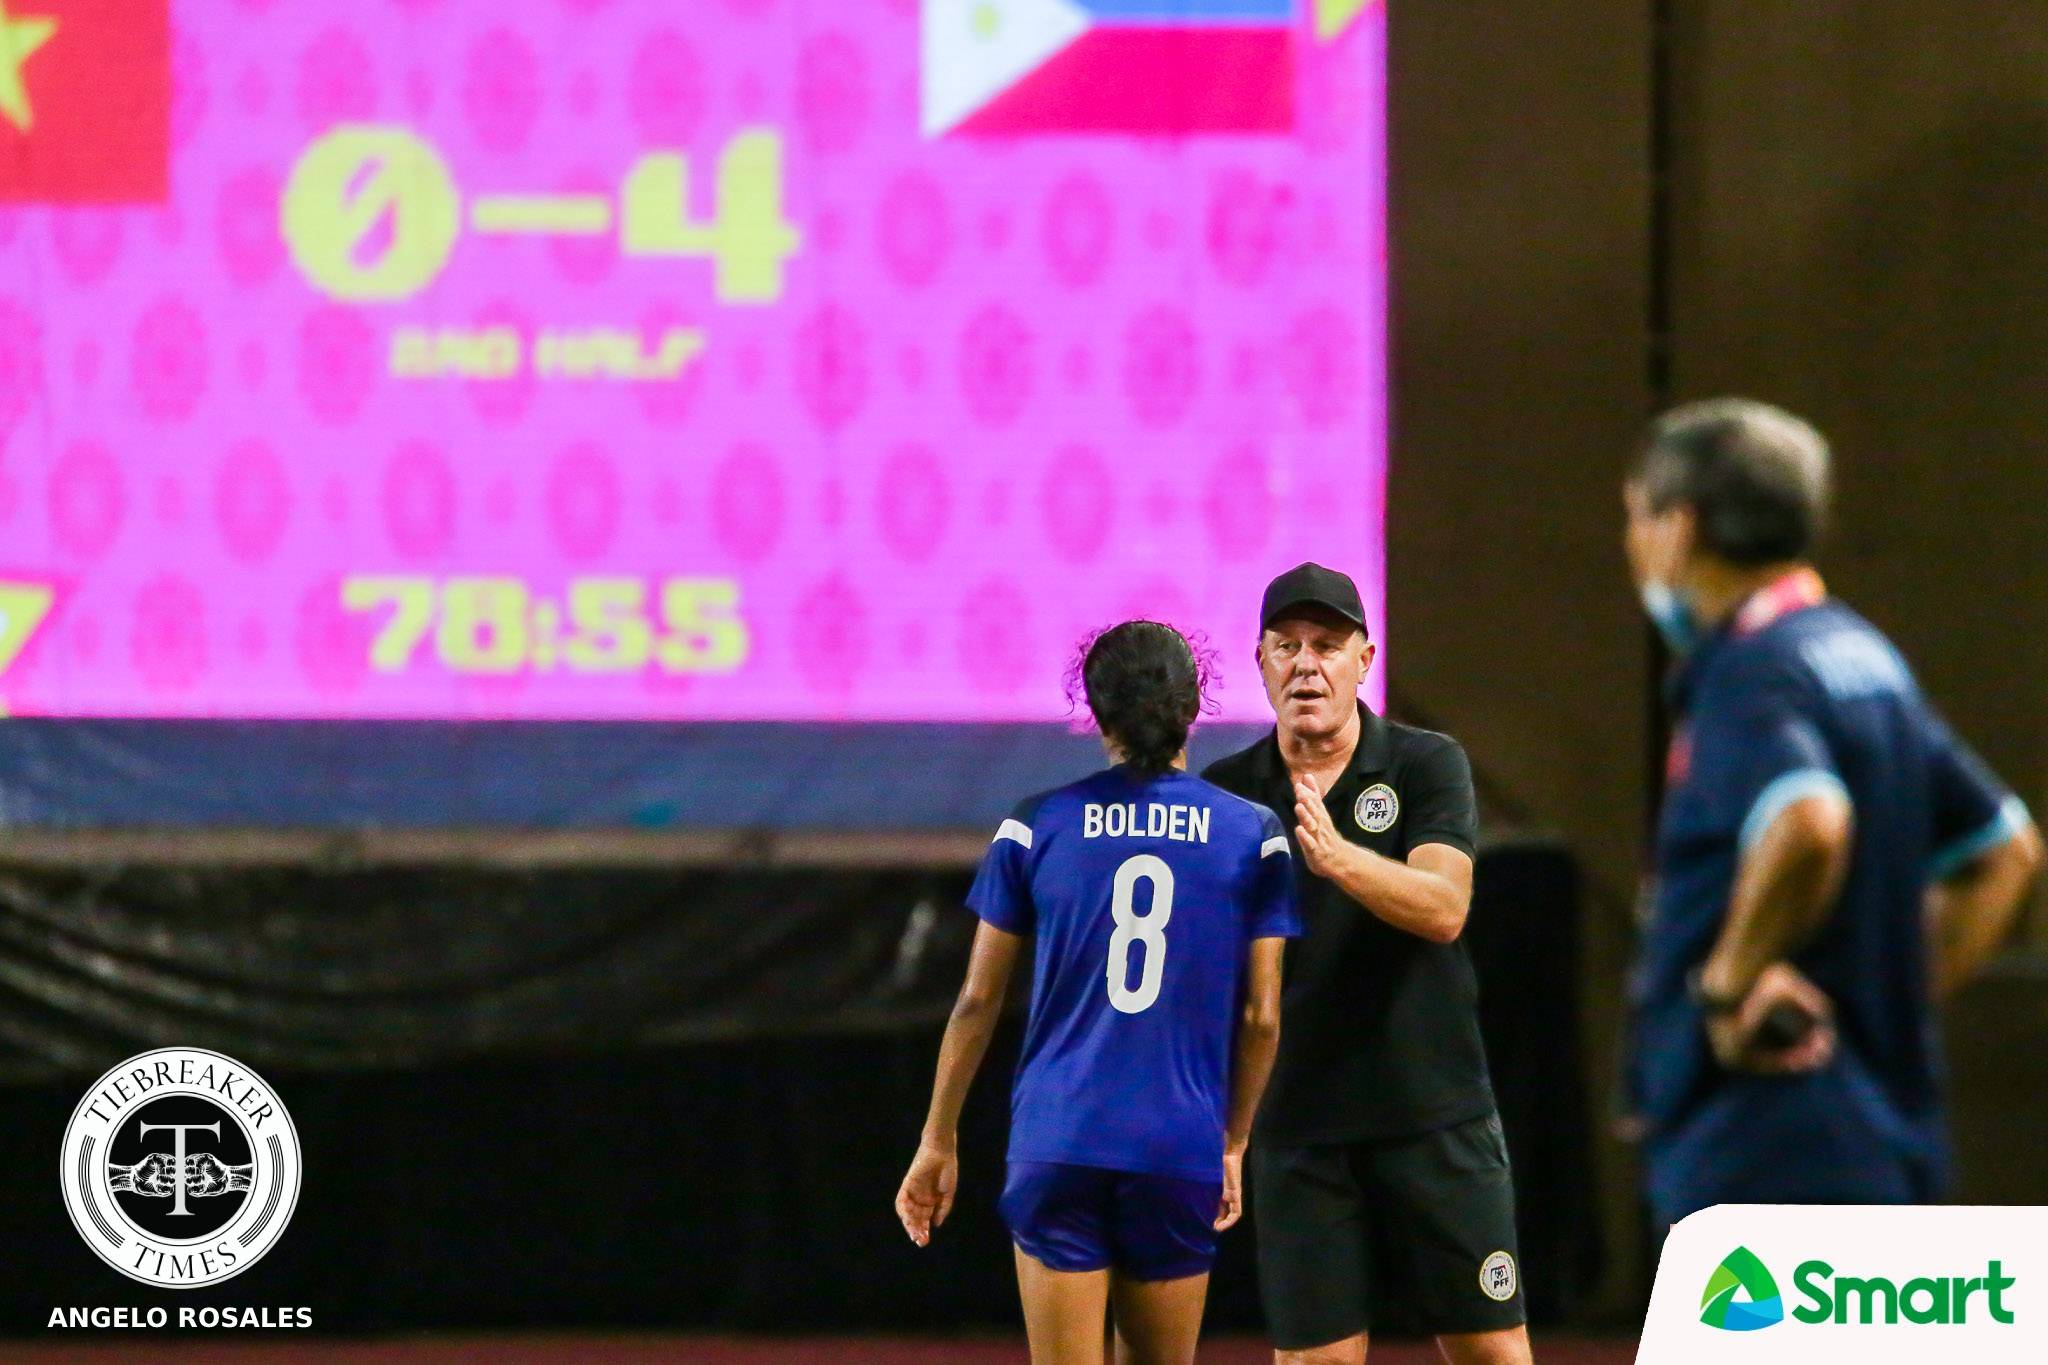 2022-AFF-Womens-Championship-Philippines-vs-Vietnam-SEMIS-PHI-Coach-and-Bolden Sarina Bolden passes credit to Filipinas after historic brace 2022 AFF Women’s Championship Filipinas Football News  - philippine sports news